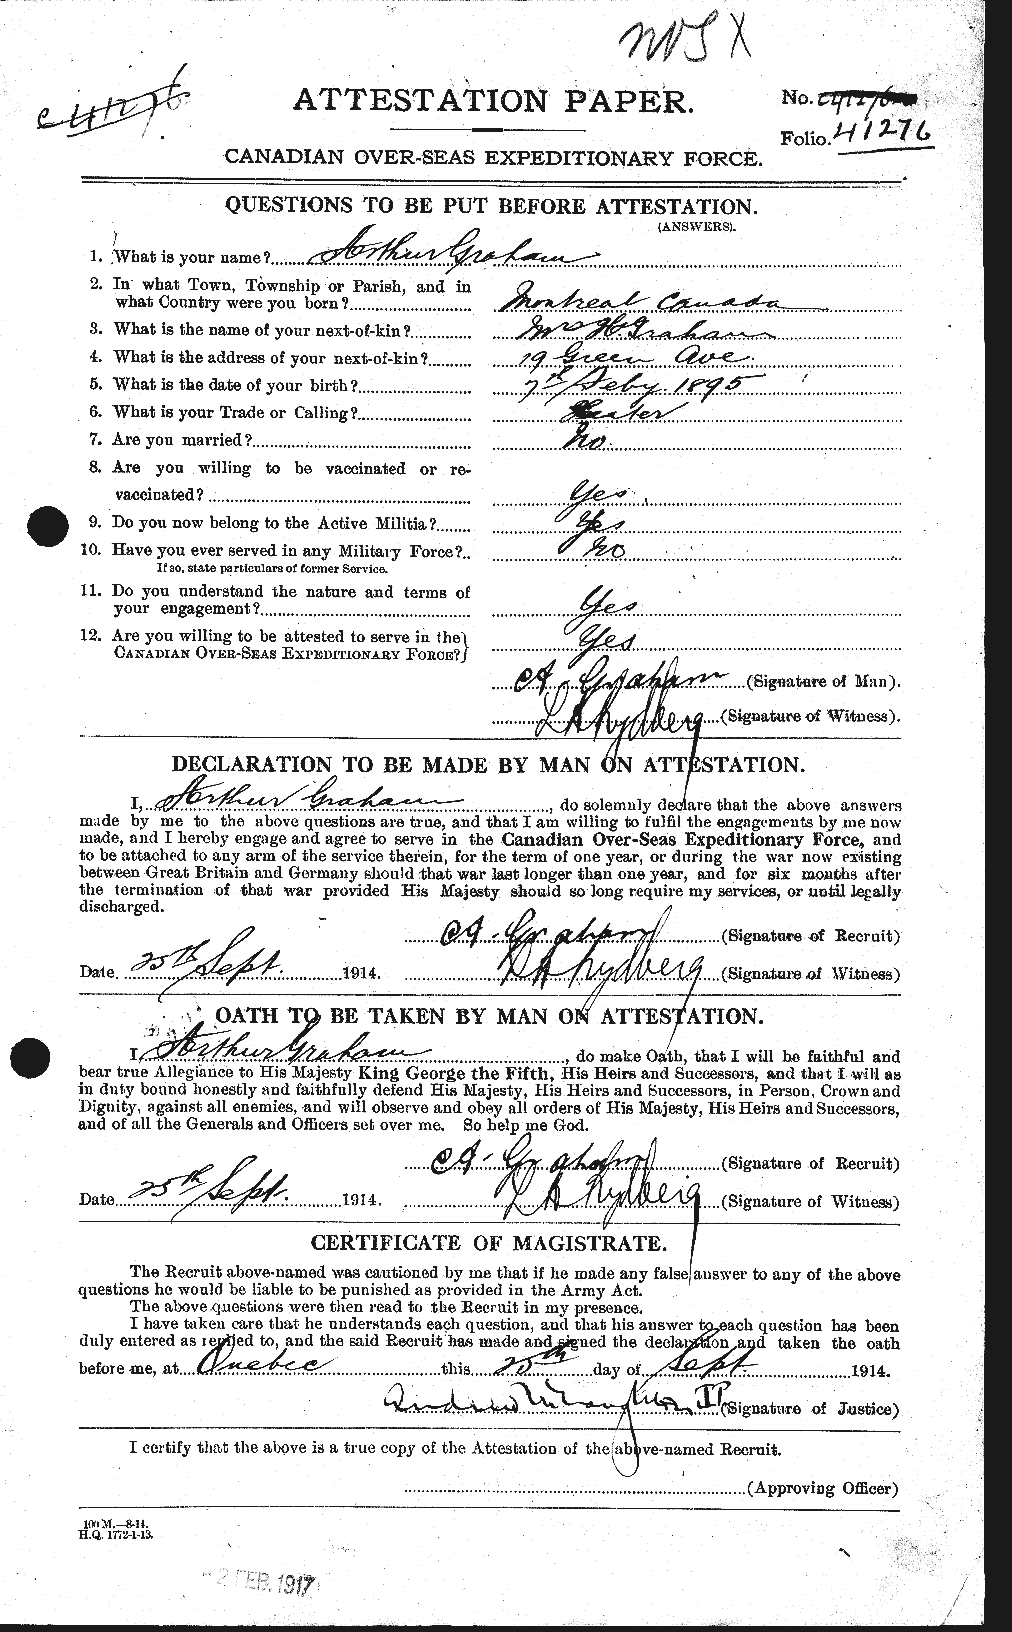 Personnel Records of the First World War - CEF 359649a